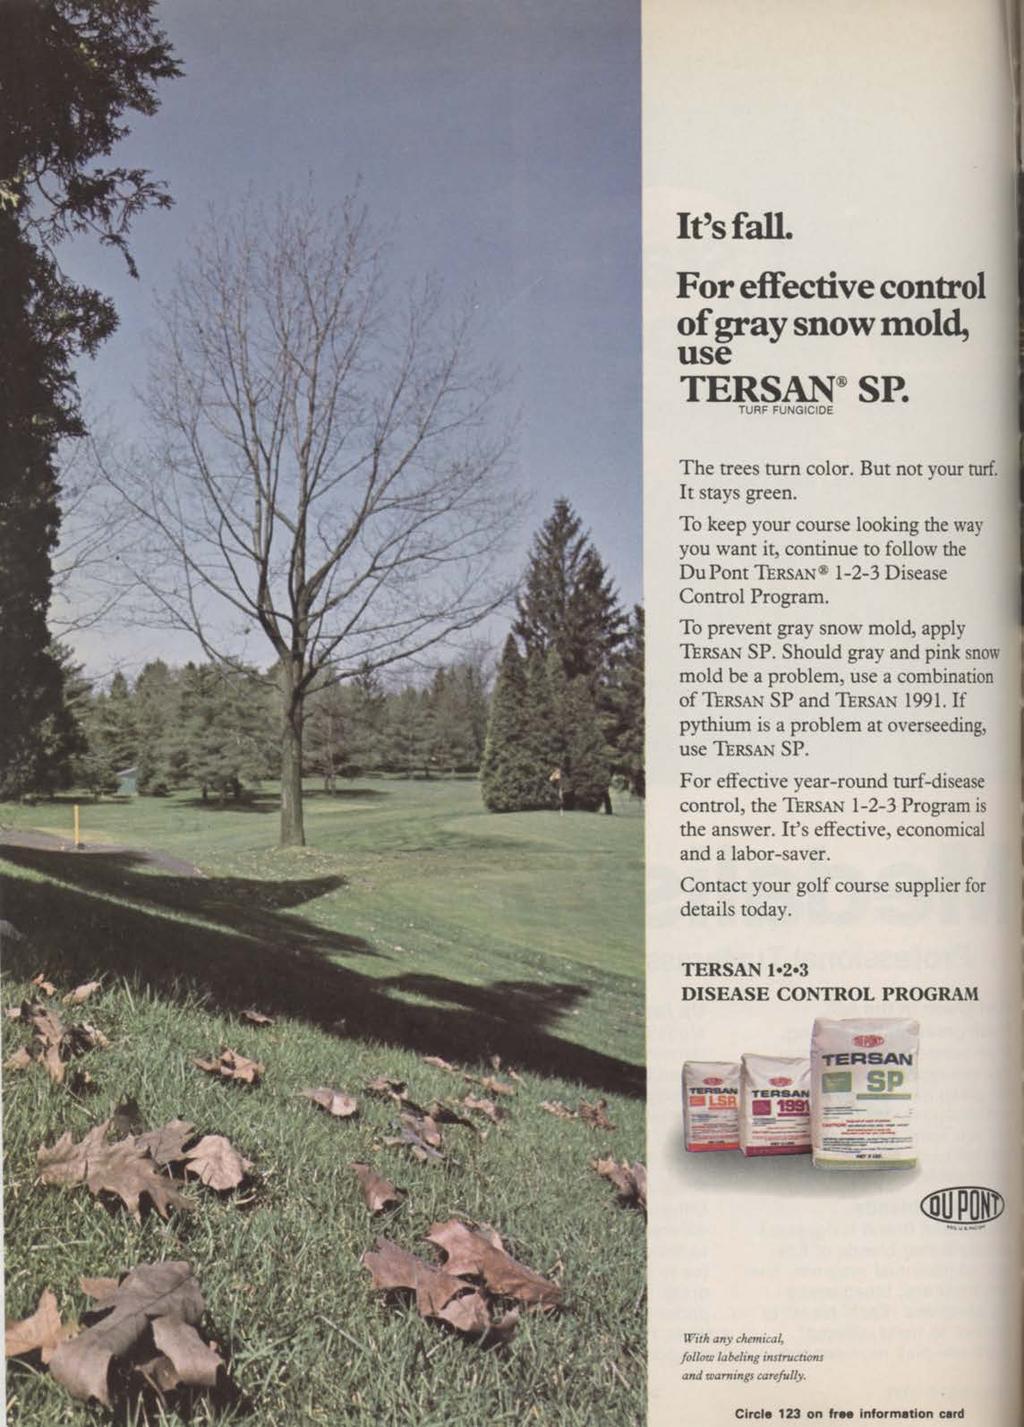 It's fall. For effective control of gray snow mold, use TERSAN SP. TURF FUNGICIDE The trees turn color. But not your turf. I It stays green.